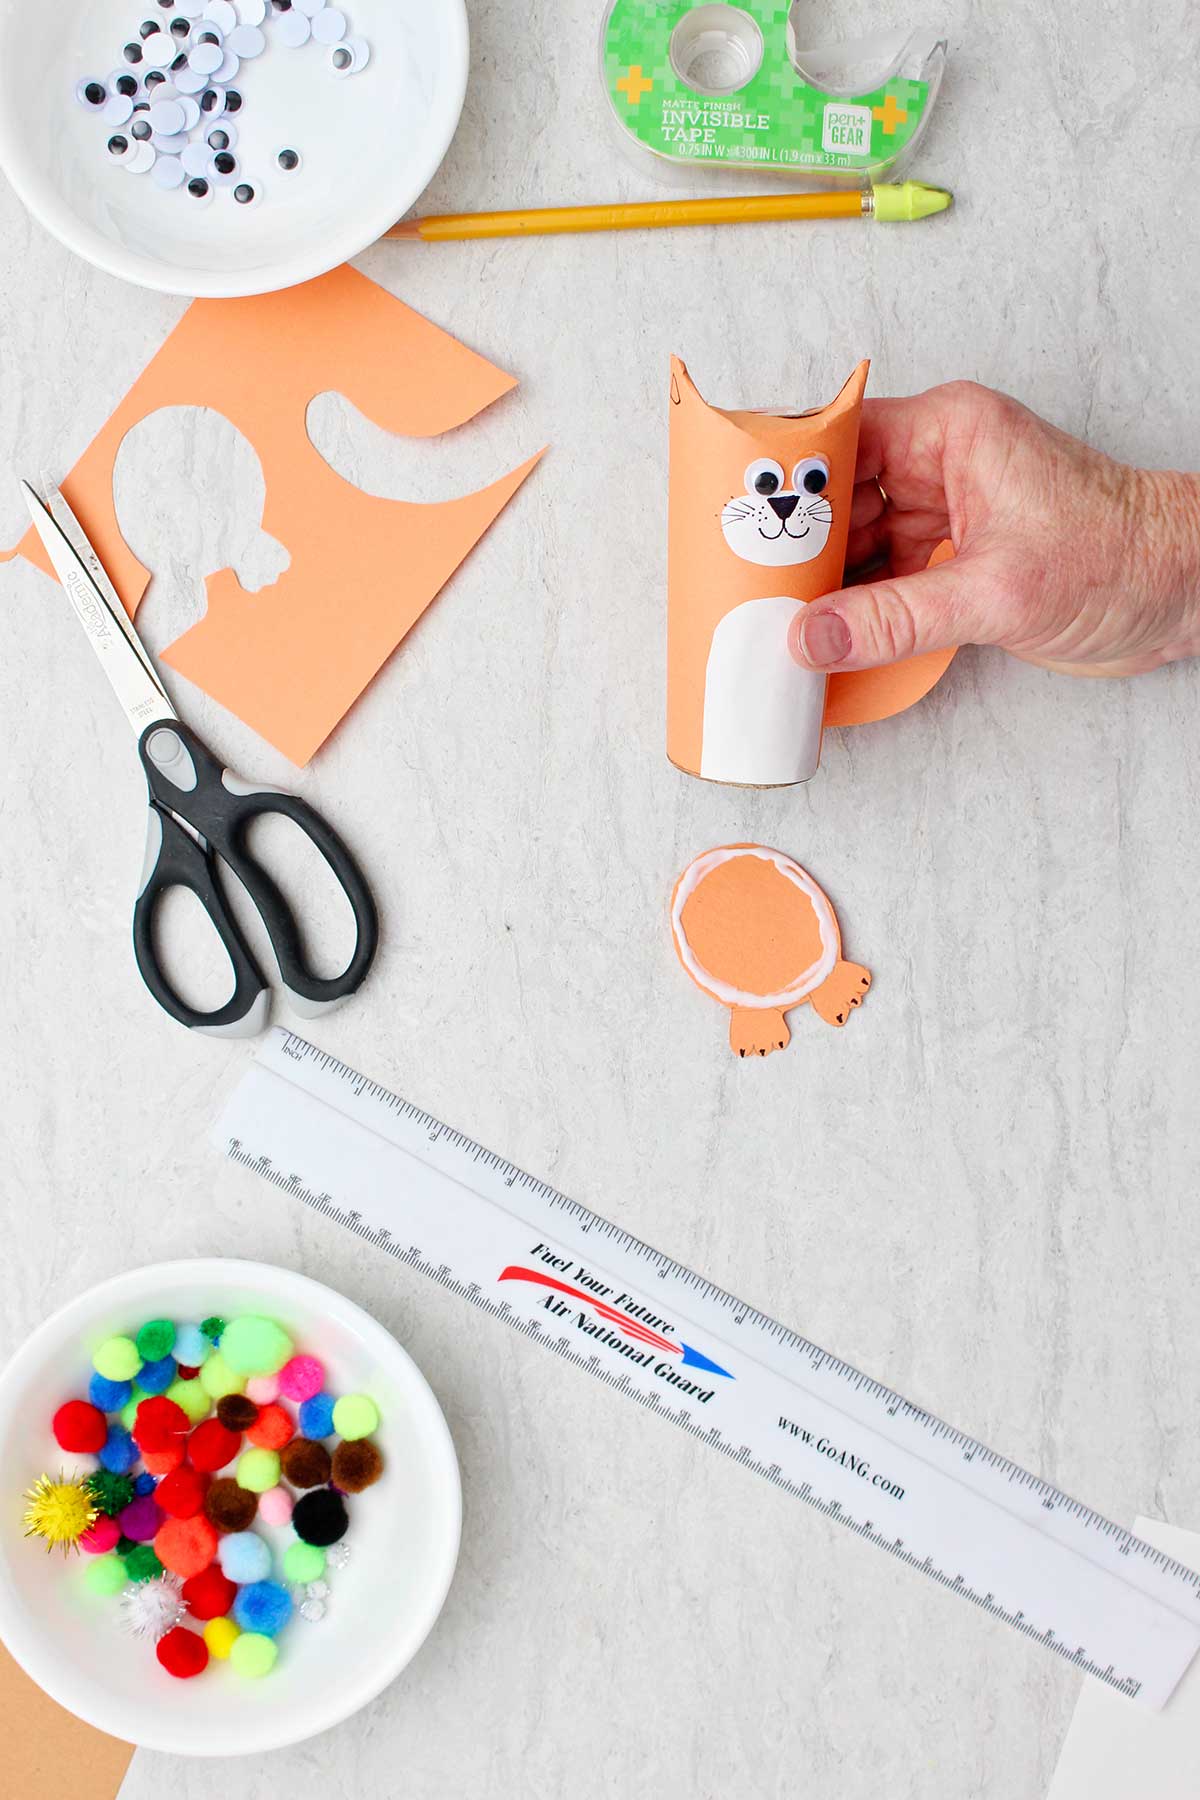 Hand holding cat toilet paper roll animal and showing how to glue the body to a base.